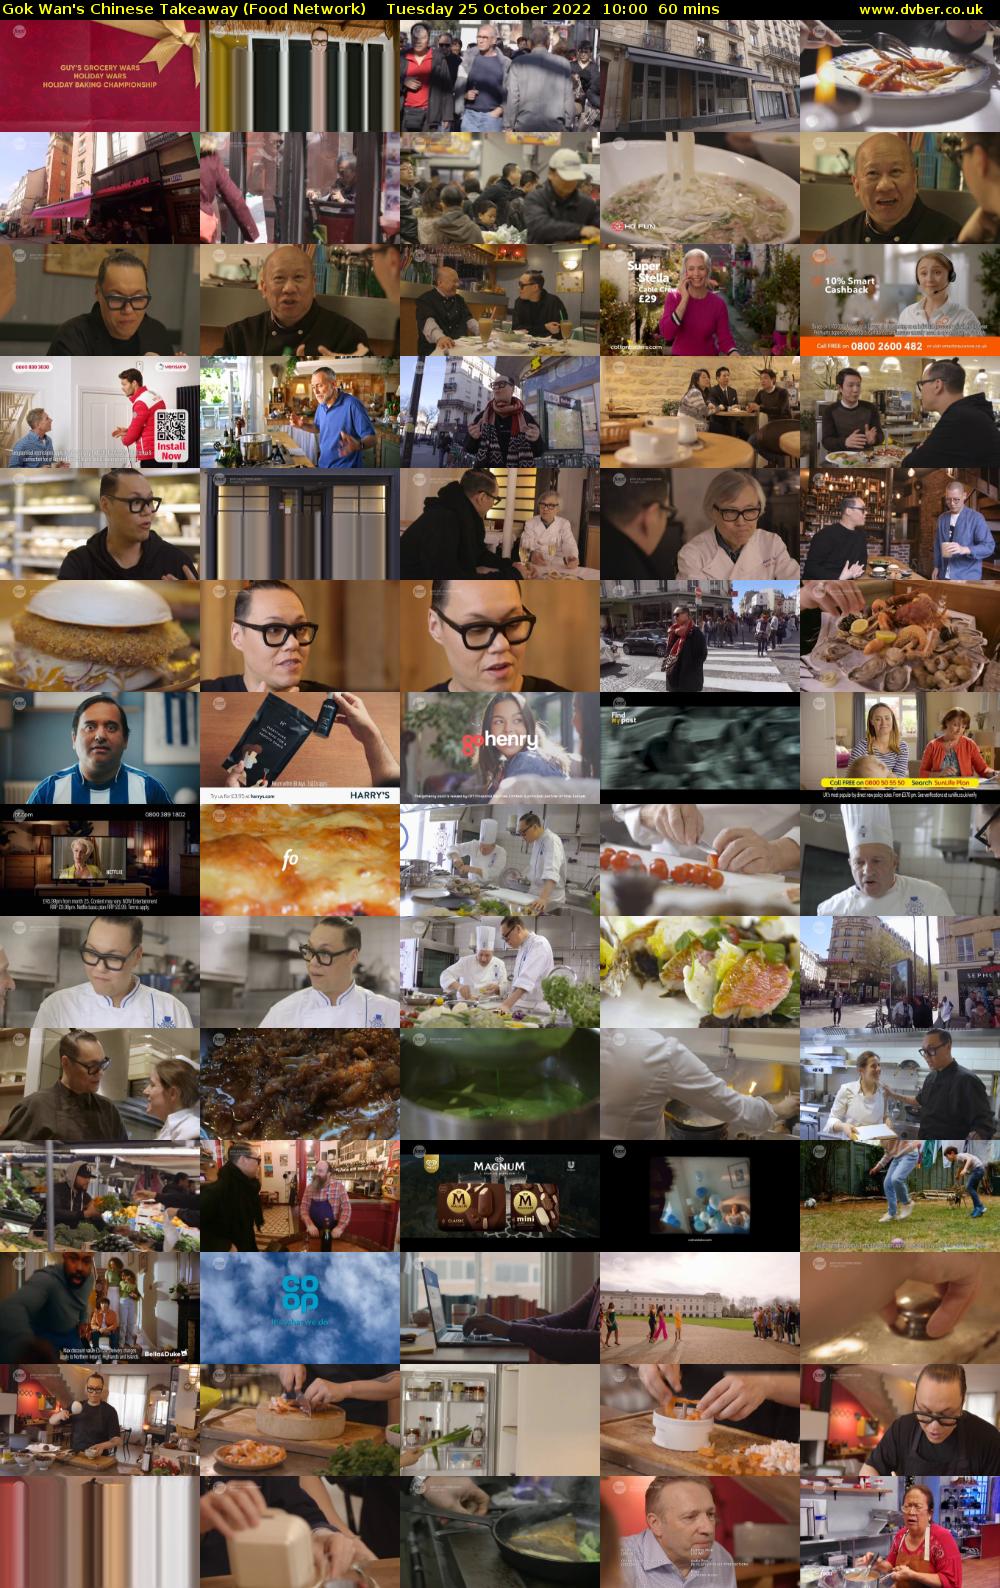 Gok Wan's Chinese Takeaway (Food Network) Tuesday 25 October 2022 10:00 - 11:00